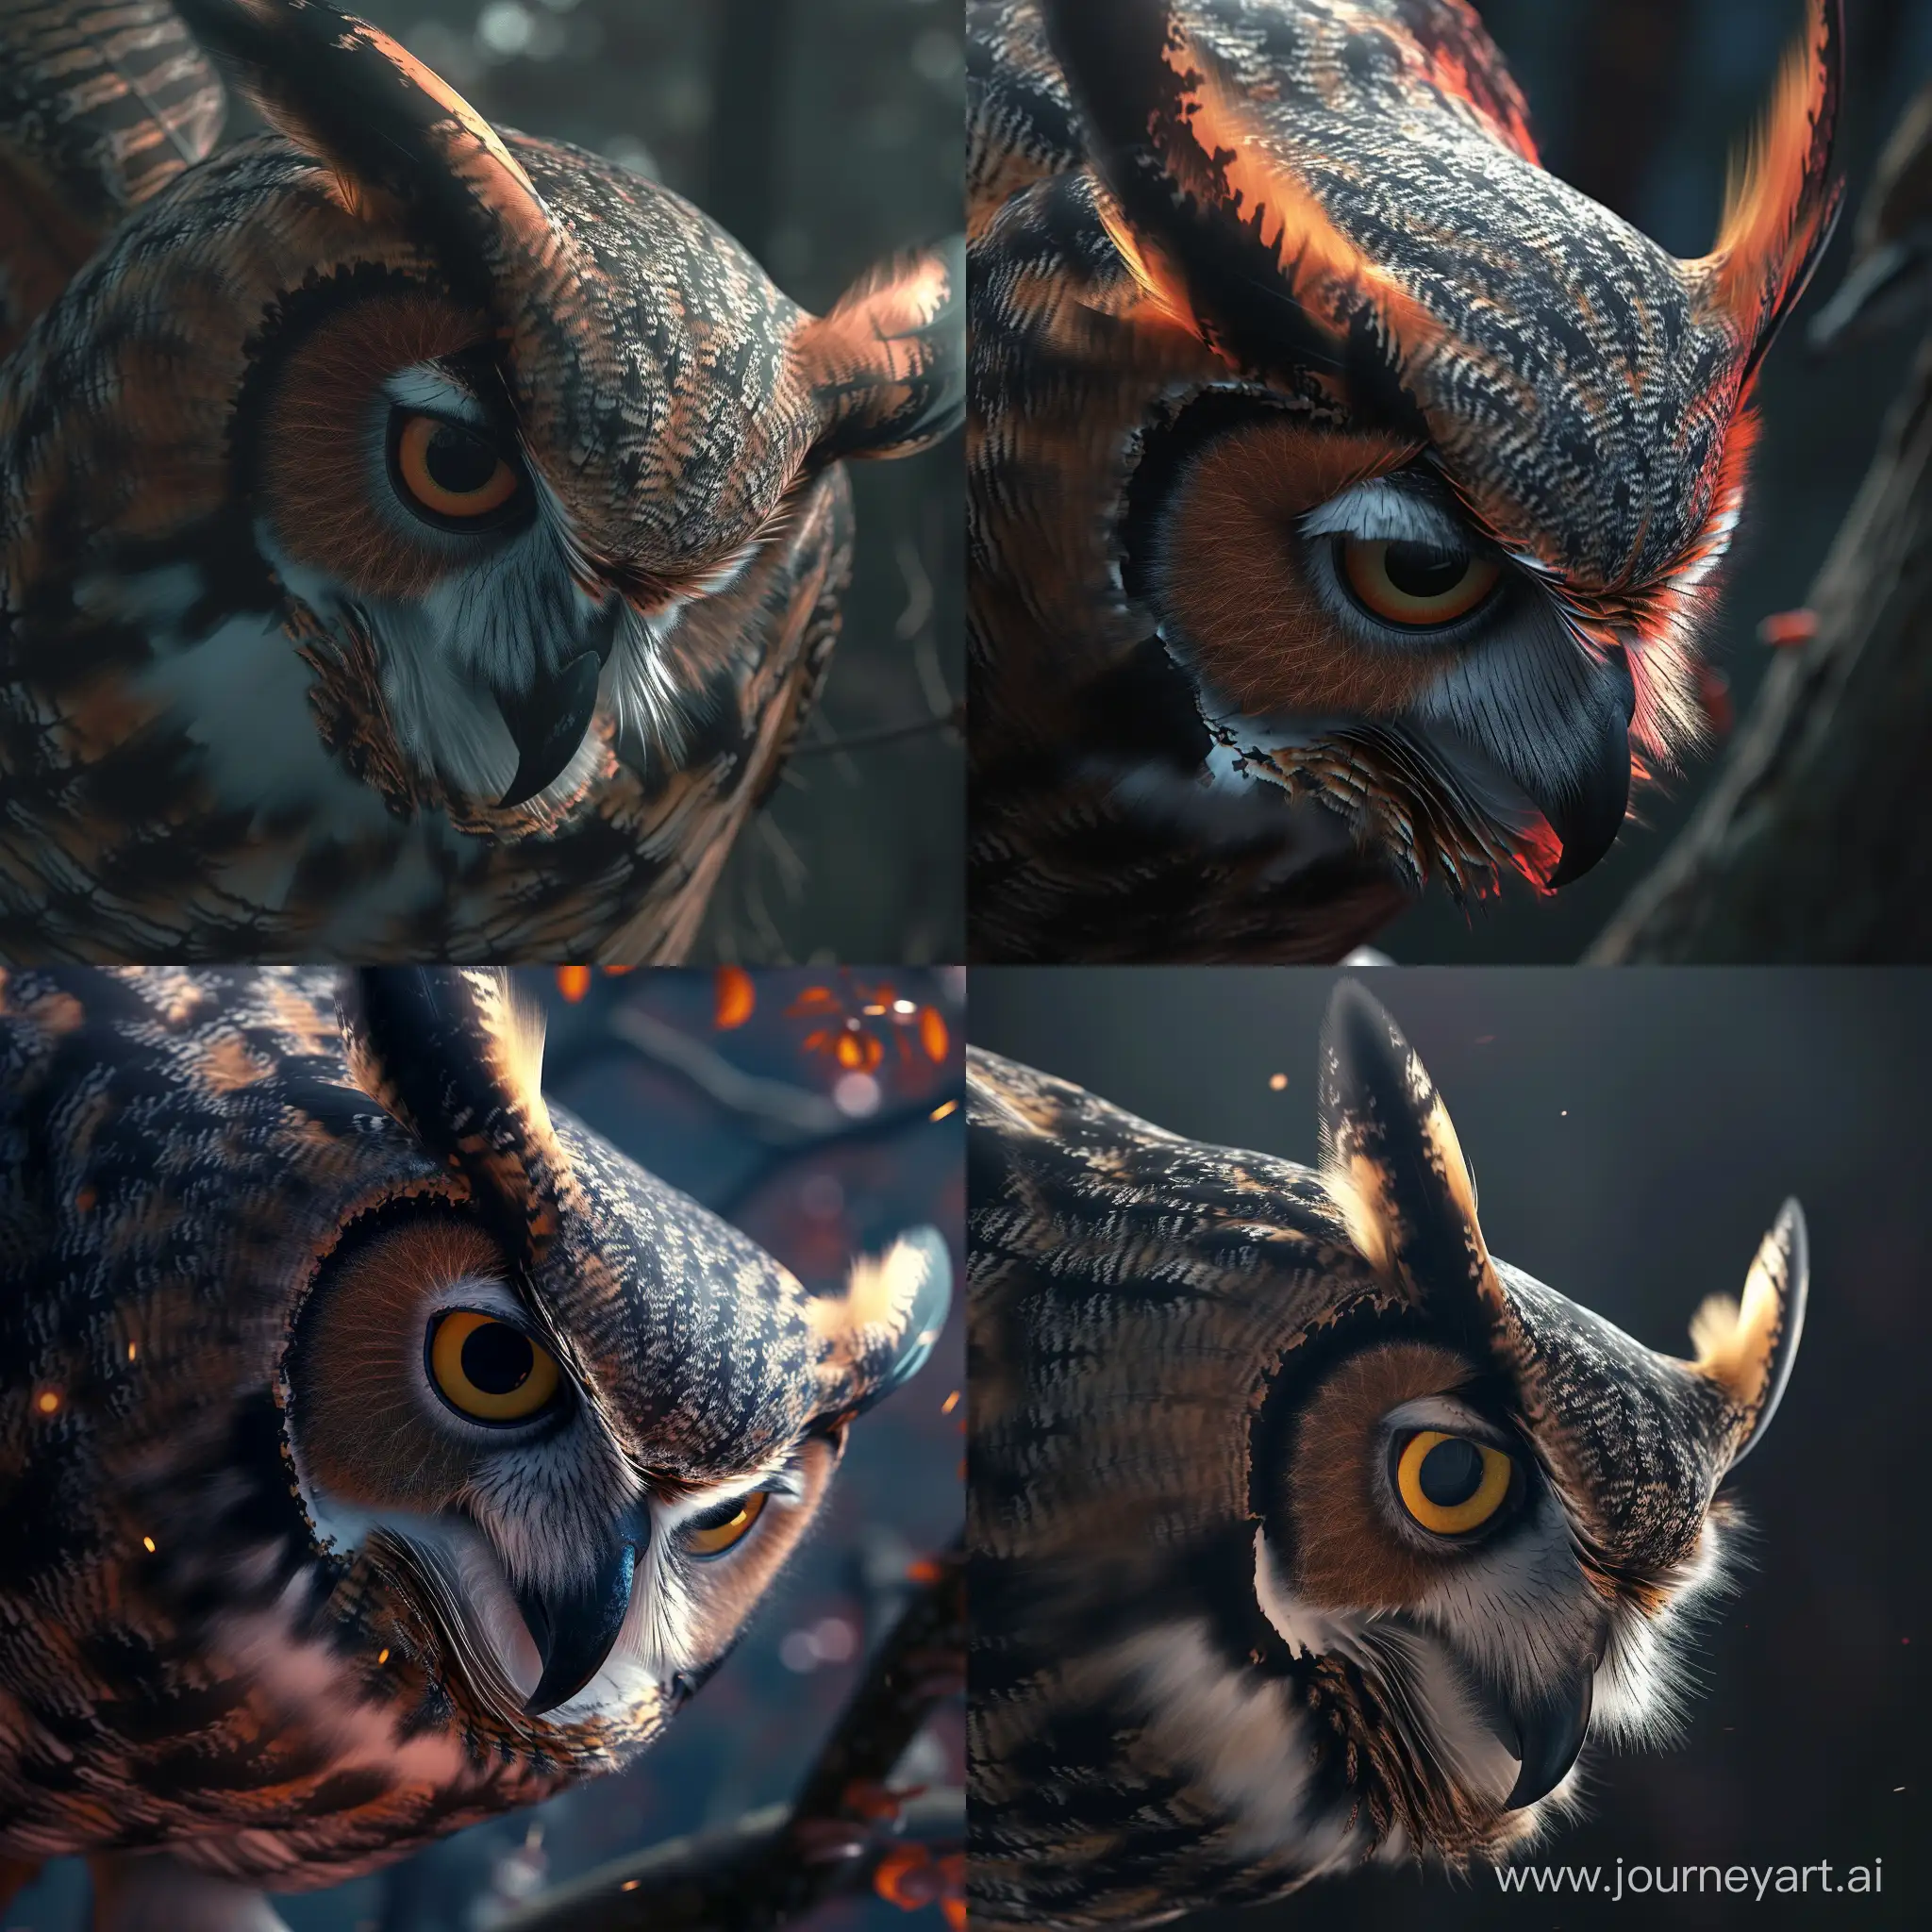 Photorealistic great horned owl looking down at an angle, dark gothic fantasy art, high contrast, visually stunning, cinematic lighting, fantasy art, chromatic aberration, Unreal Engine, Cinematic, colour Grading, portrait Photography, hyper-detailed, beautifully colour-coded, insane details, intricate details, beautifully colour graded, Unreal Engine, Cinematic, colour Grading, Natural Lighting, ray Tracing Global Illumination, Glowing, Shadows, Shimmering, Ray Tracing Reflections, Lumen Reflections, Screen Space Reflections, Diffraction Grading, Chromatic Aberration, GB Displacement, Ray Traced, FKAA, TXAA, RTX, SSAO, Shaders, OpenGL-Shaders, GLSL-Shaders, Cel Shading, CGI, VFX, SFX, insanely detailed and intricate, hypermaximalist, elegant, hyper realistic, super detailed, dynamic pose, photography, backlit lighting, hyper realism, shadows, scenery, photography, photograph, maximum detail, maximum realism, intricate details, cinematic lighting, high quality, HD, in flat style